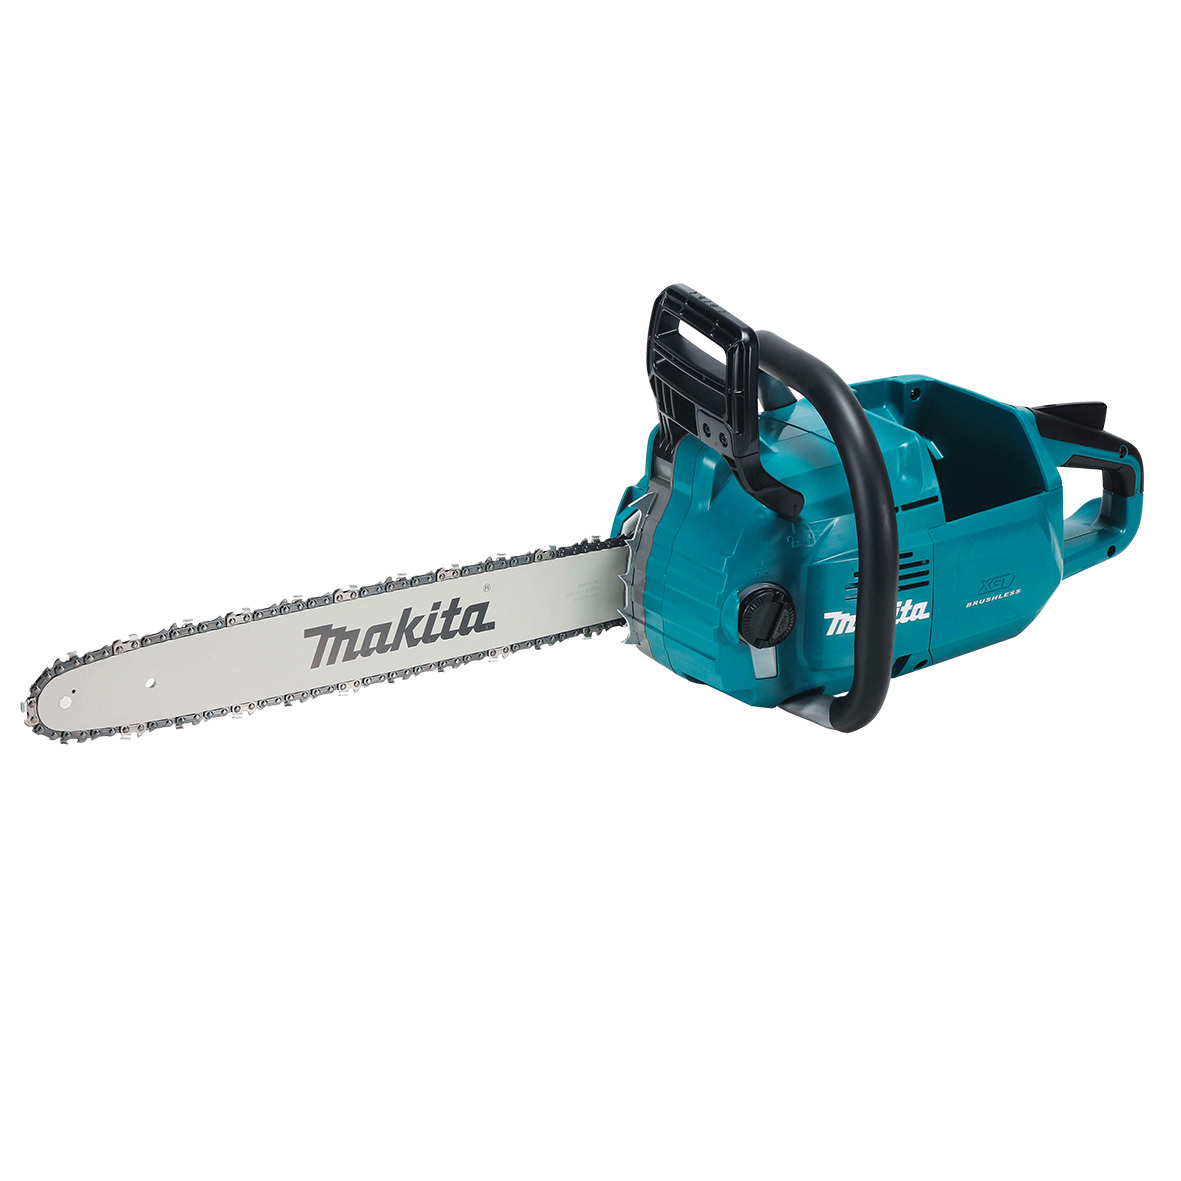 Makita 40V MAX 450mm Brushless Chainsaw (tool only) UC013GZ